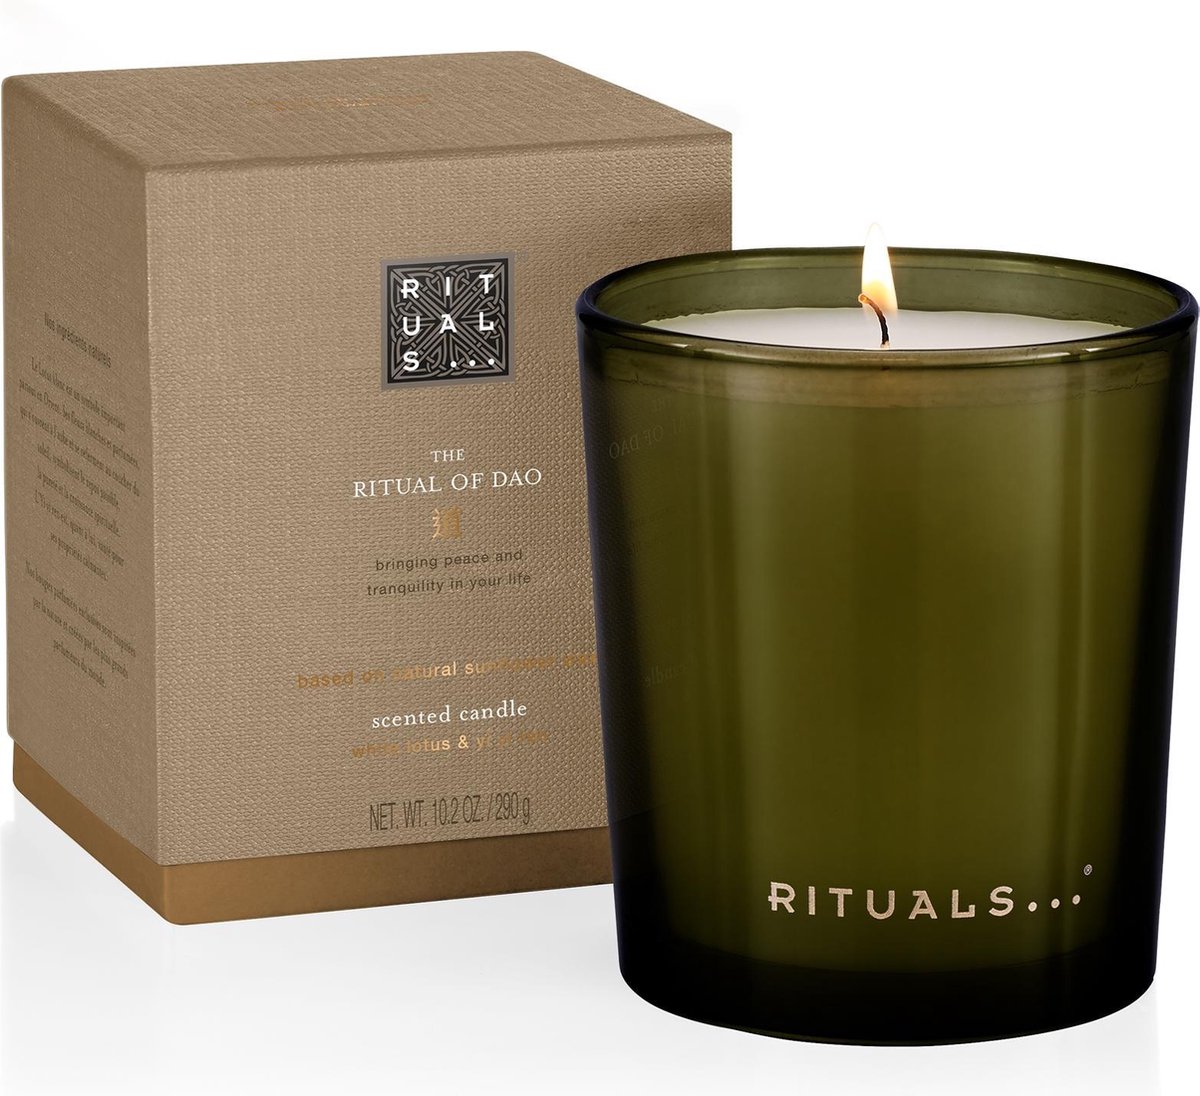 RITUALS The Ritual of Dao - Scented Candle Geurkaars - 290 g | bol